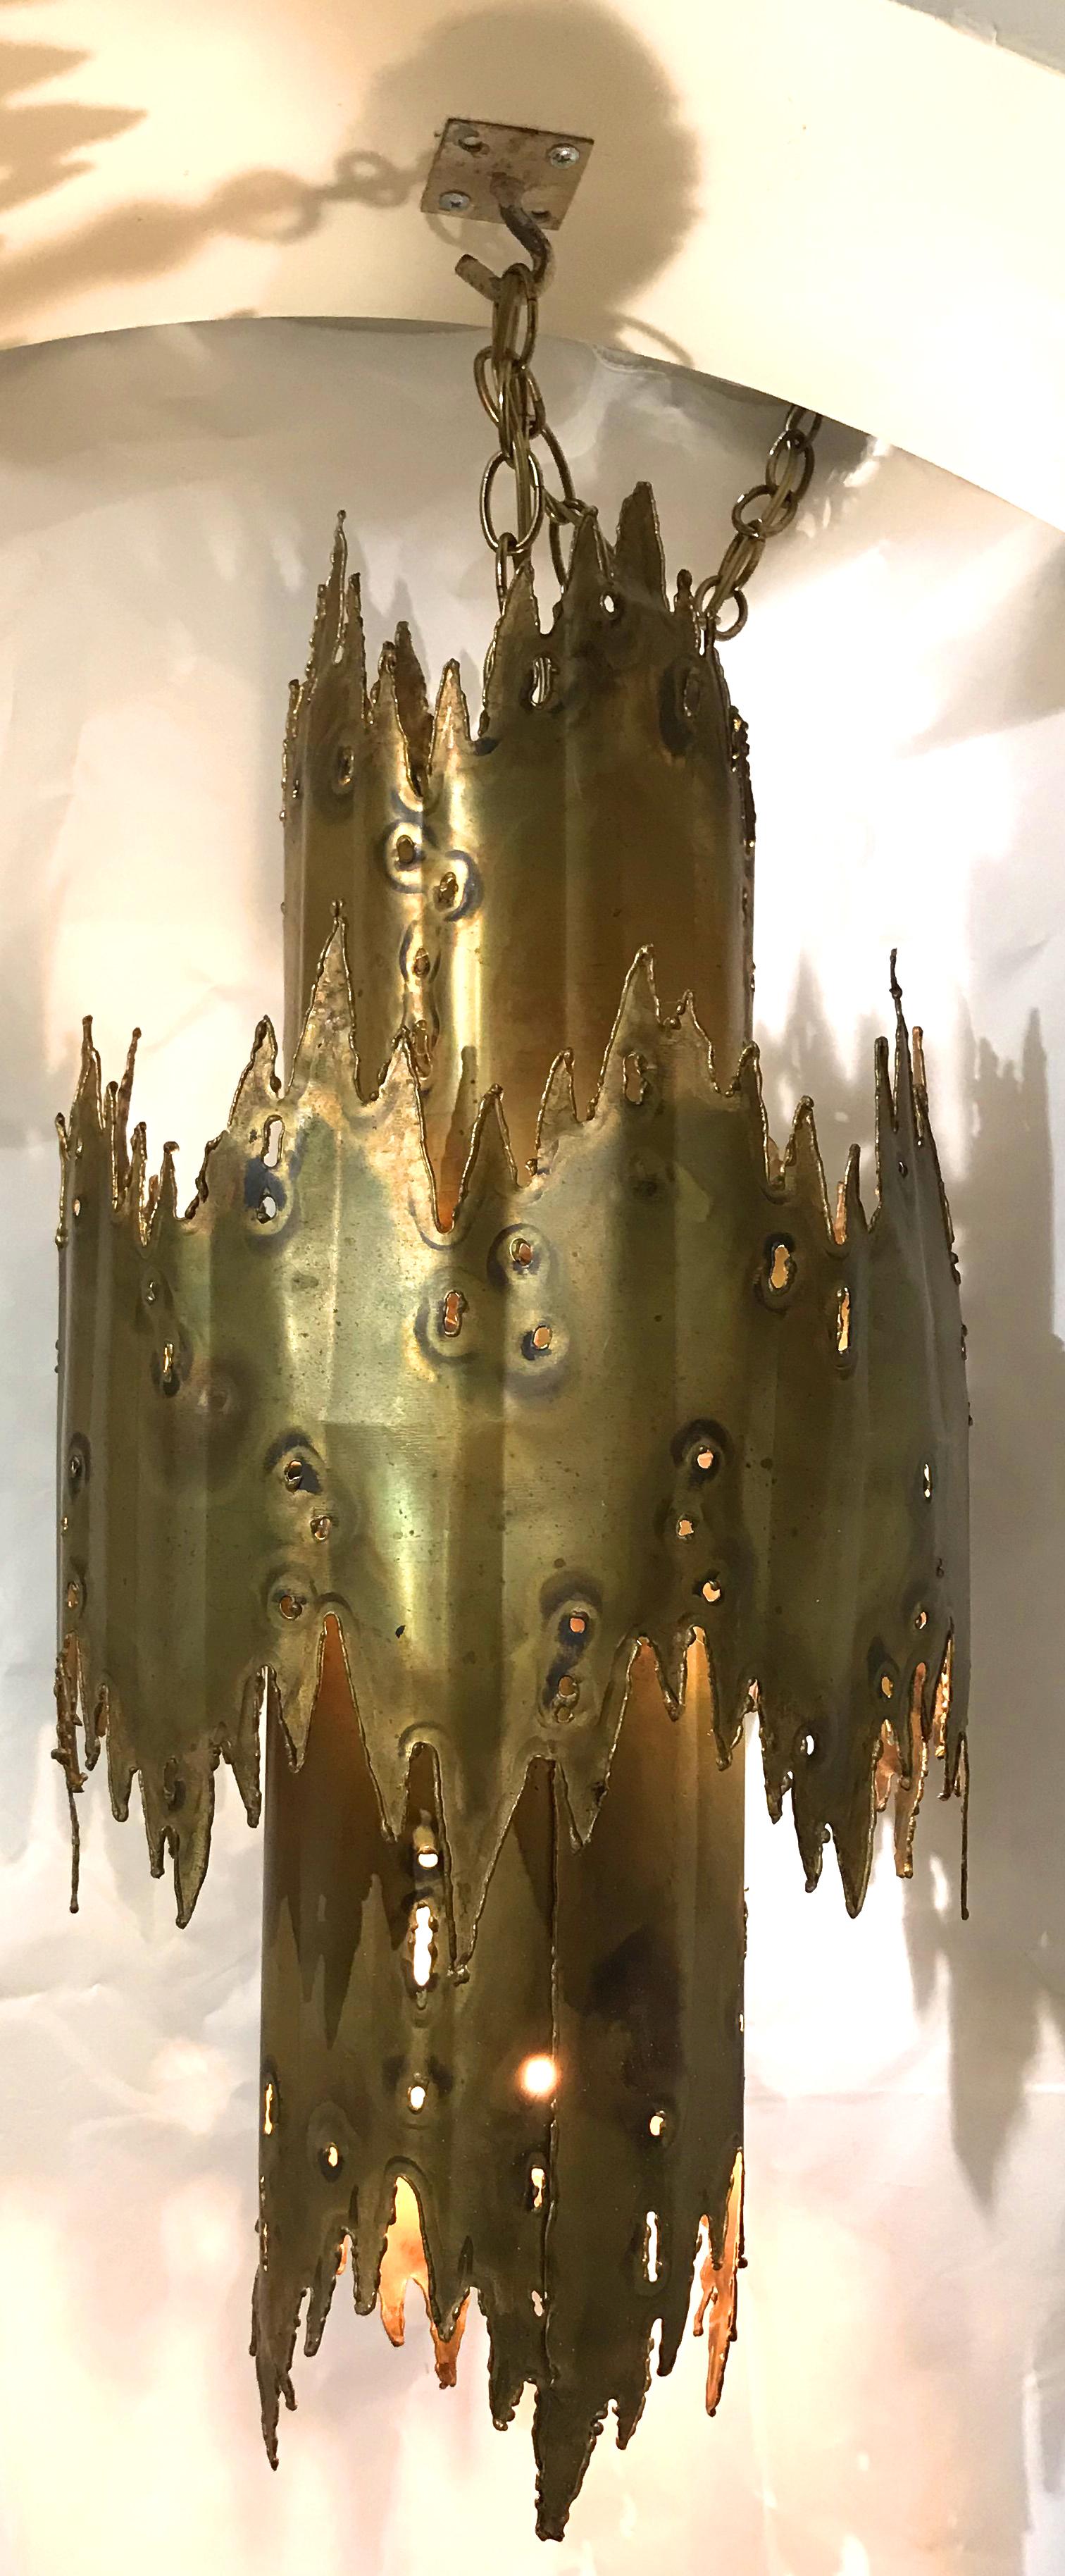 A fine example of a torch cut brass chandelier in the form of two tiered concentric circles by metal sculptor Tom Greene, creating a beautiful patina with an oxyacetylene torch. 

Each piece that Tom Greene made was unique, no pieces are exactly